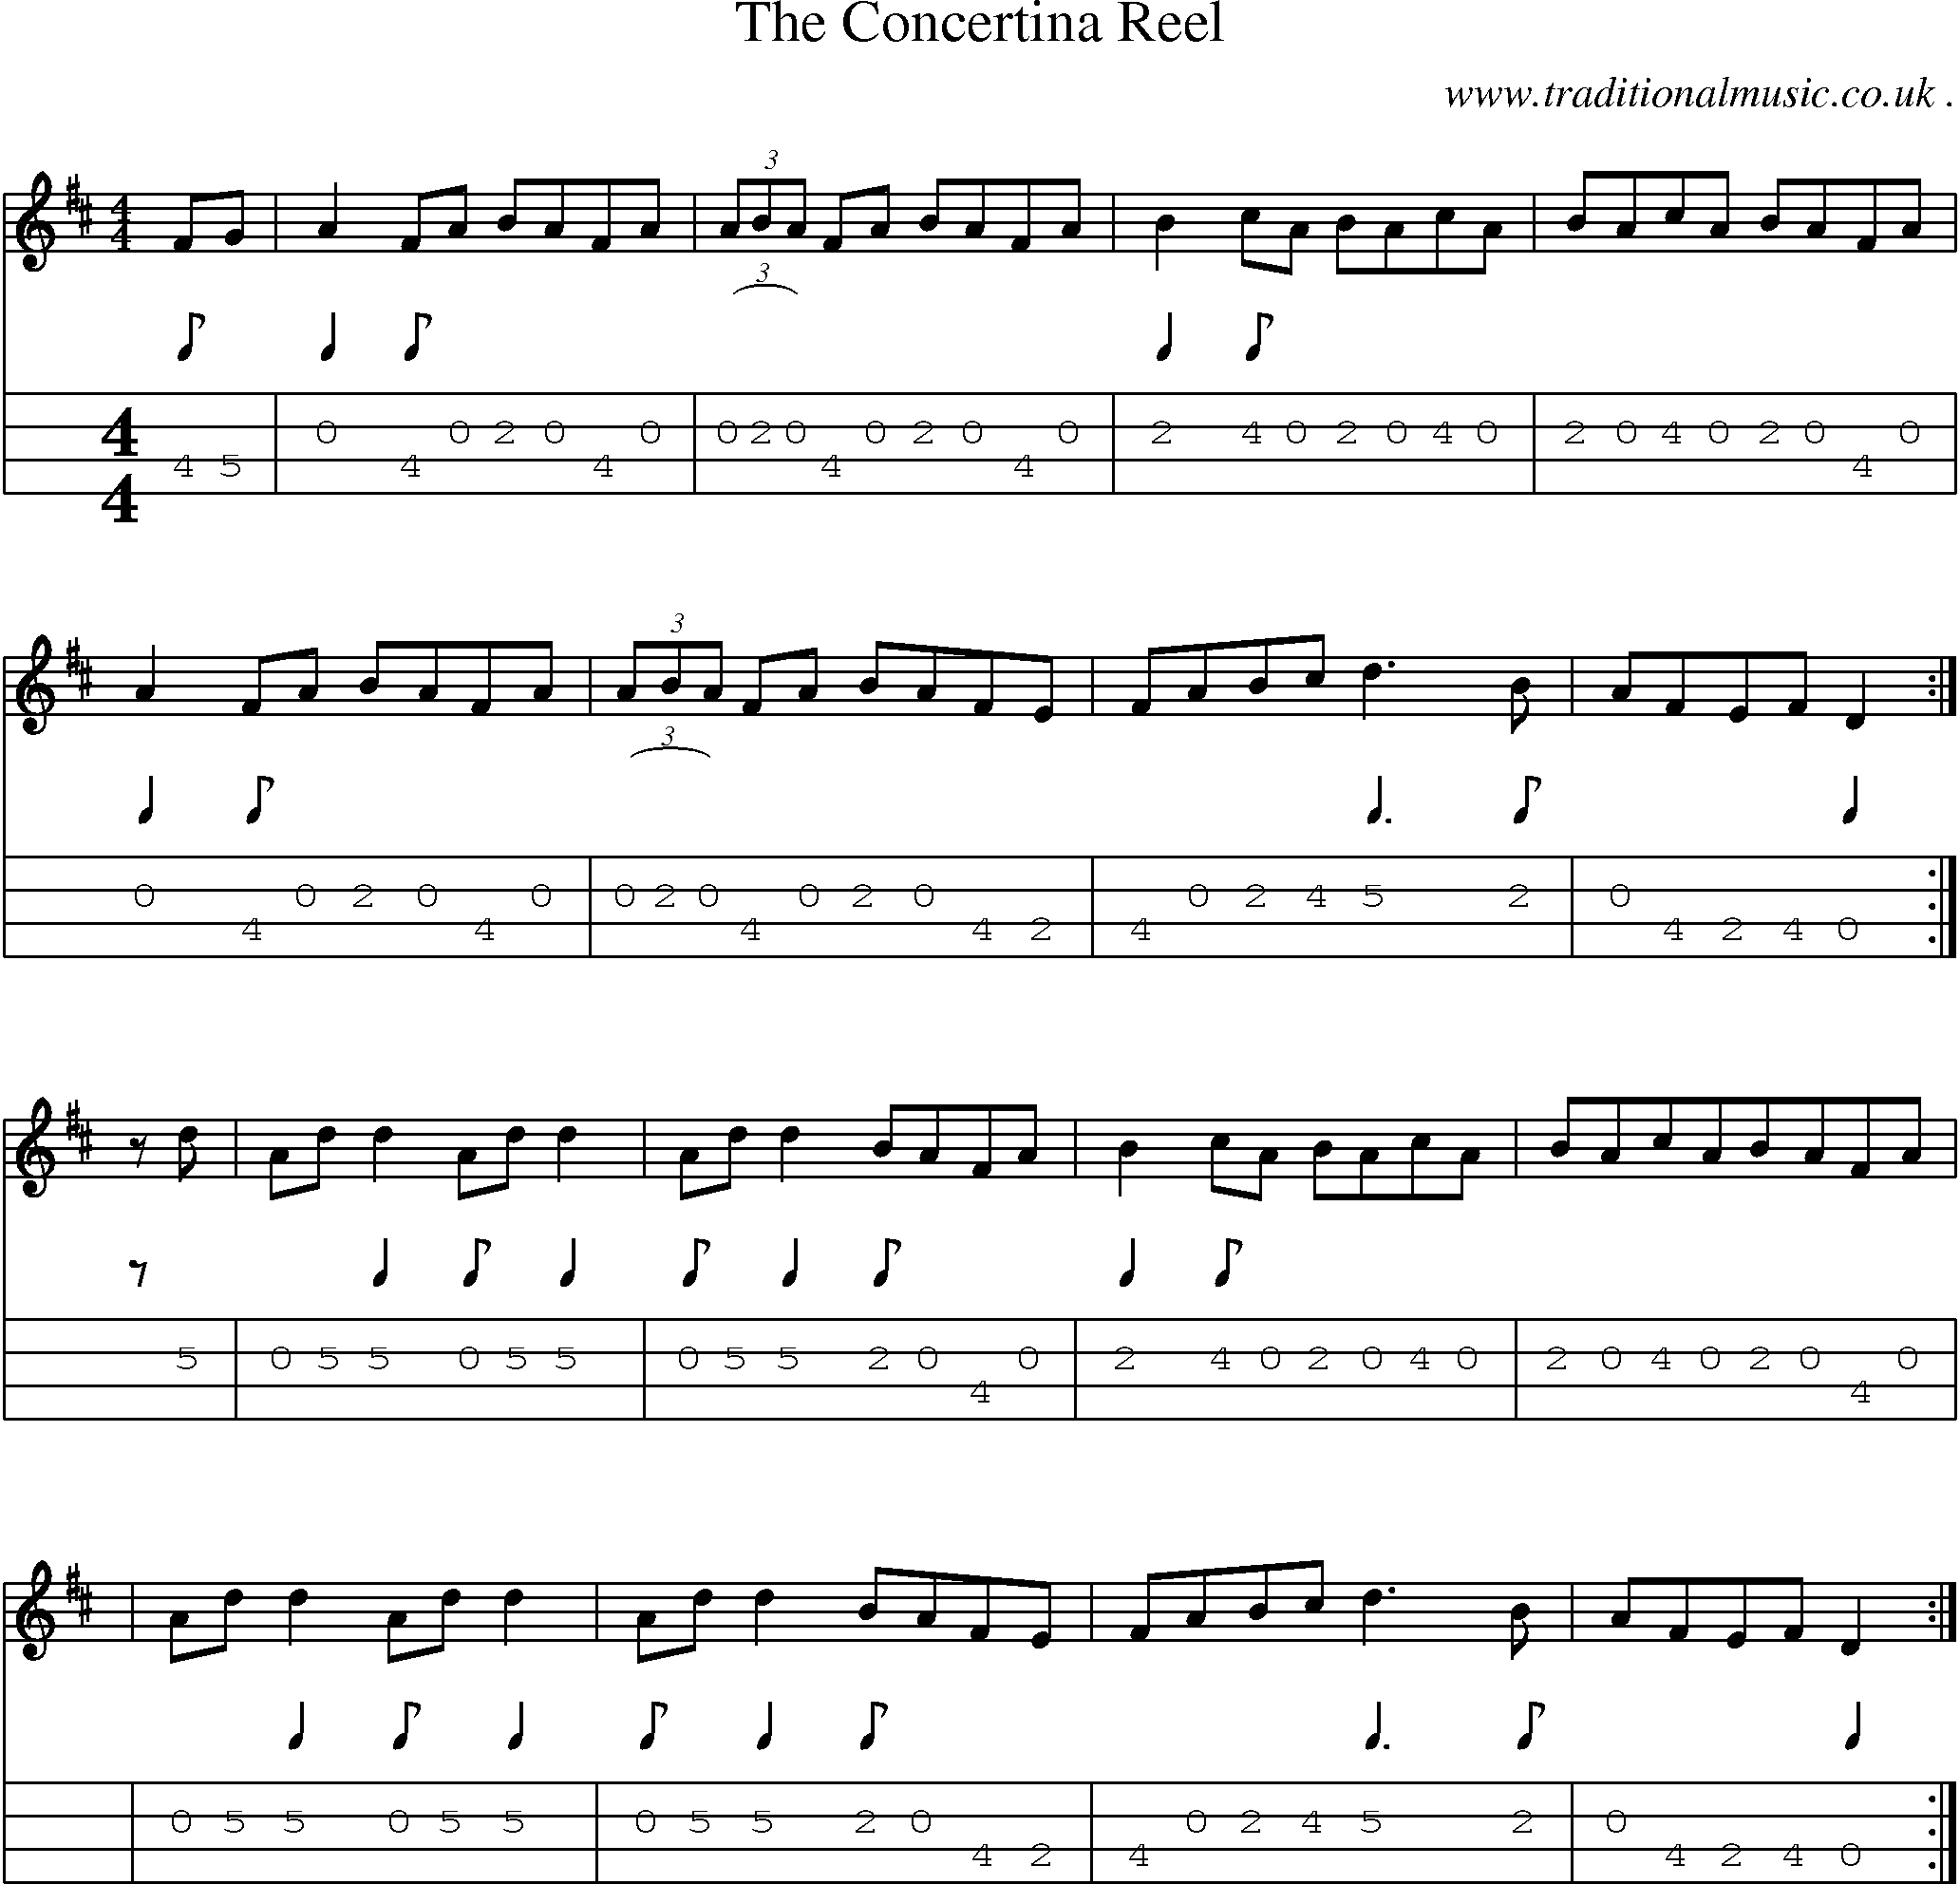 Sheet-Music and Mandolin Tabs for The Concertina Reel